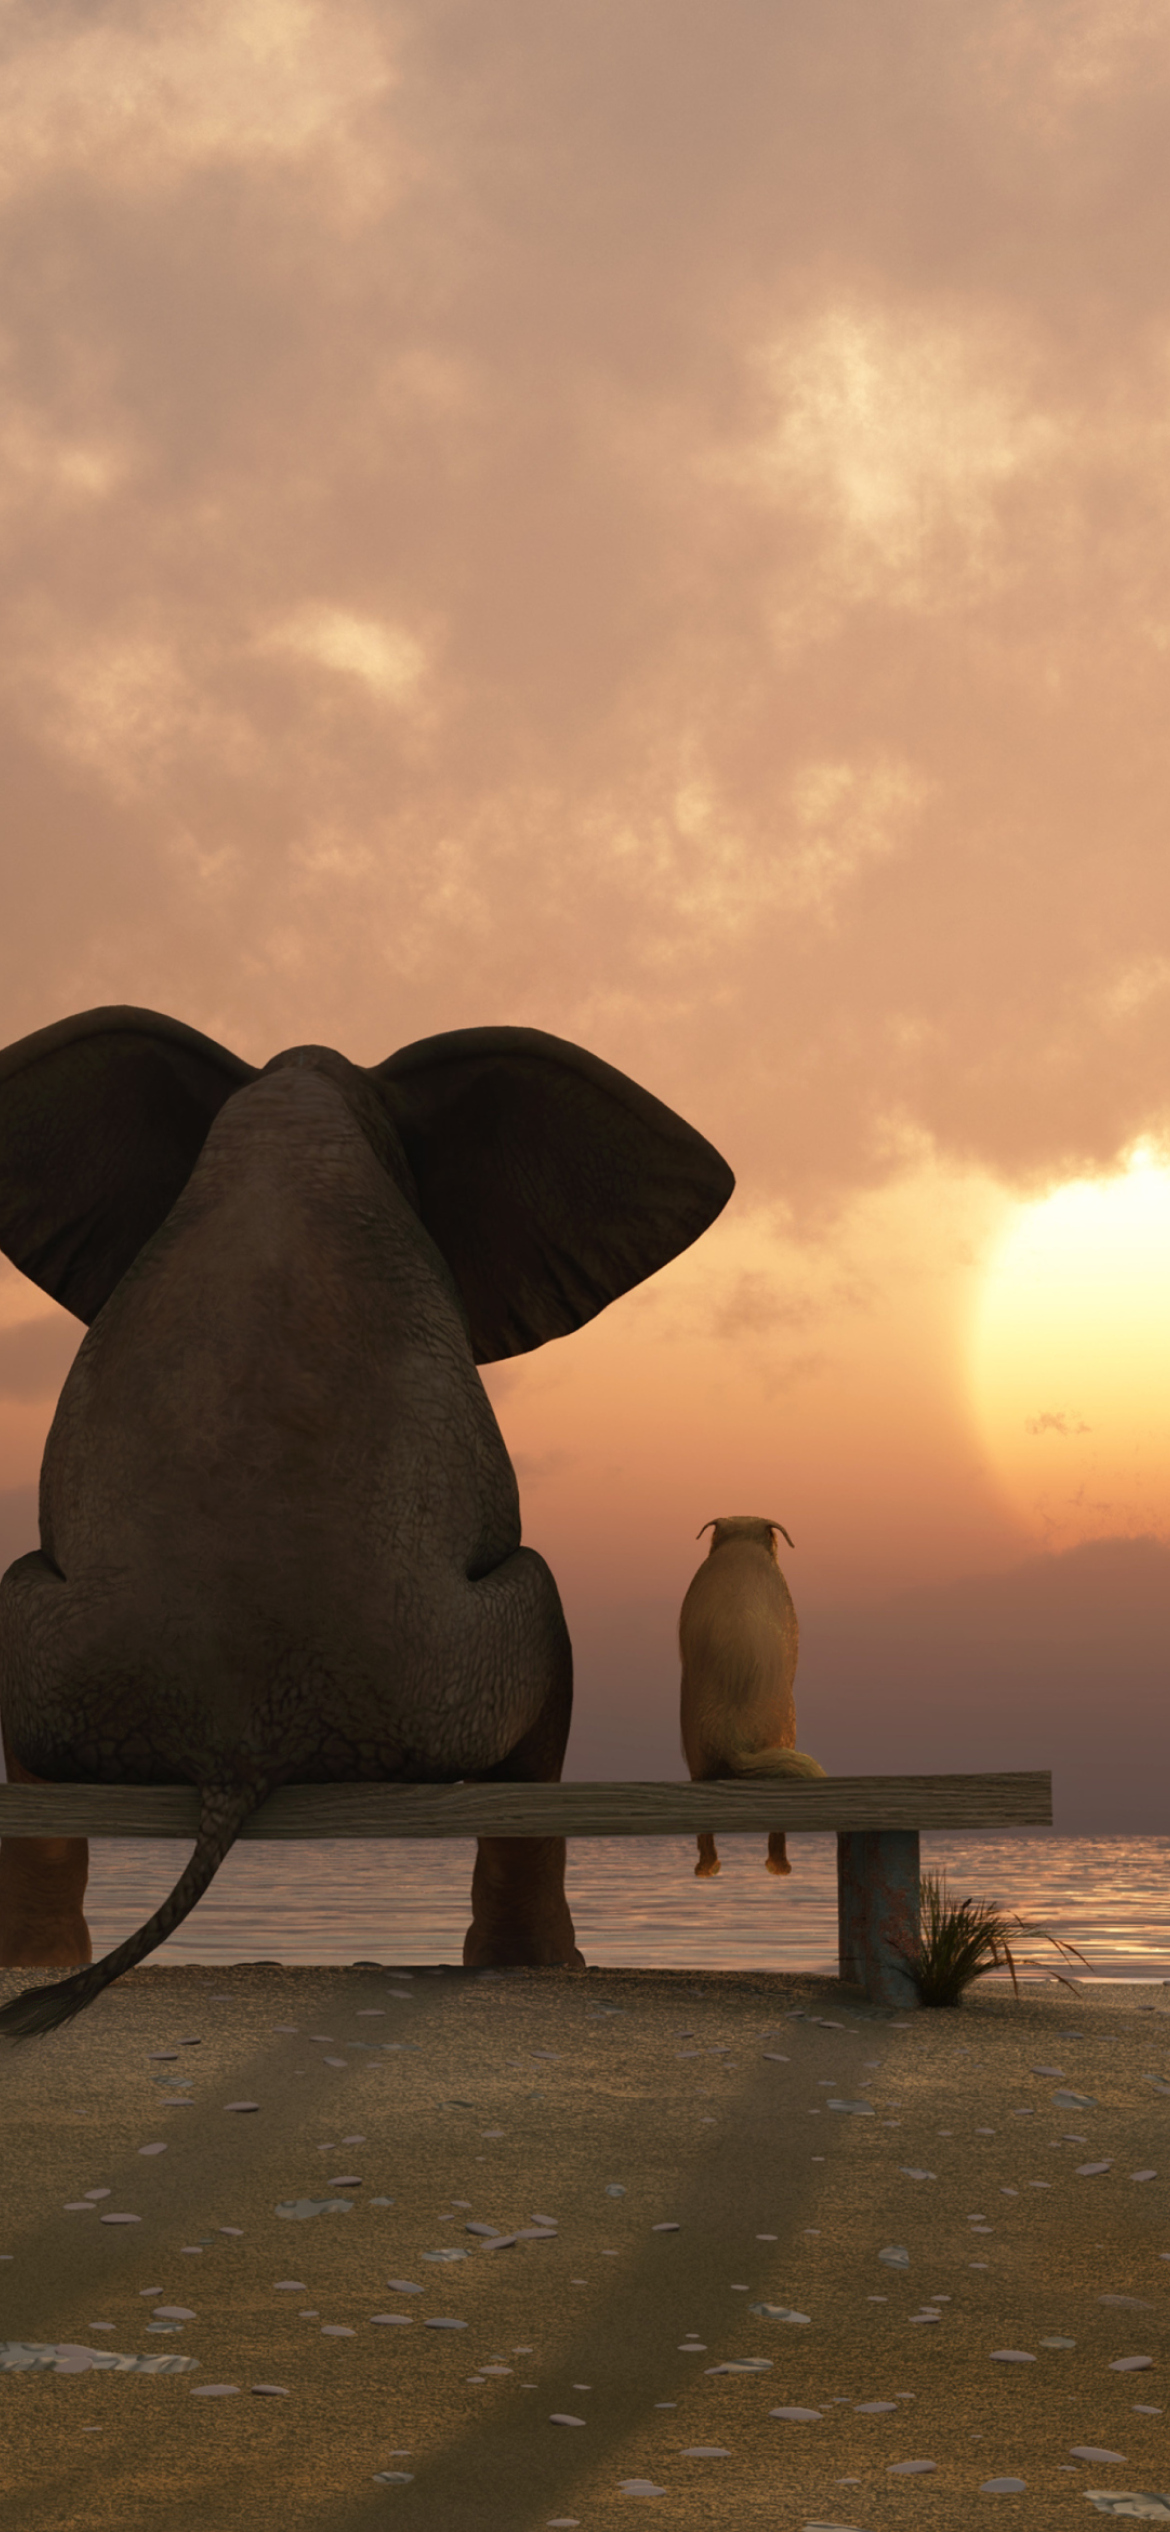 Elephant And Dog Looking At Sunset wallpaper 1170x2532